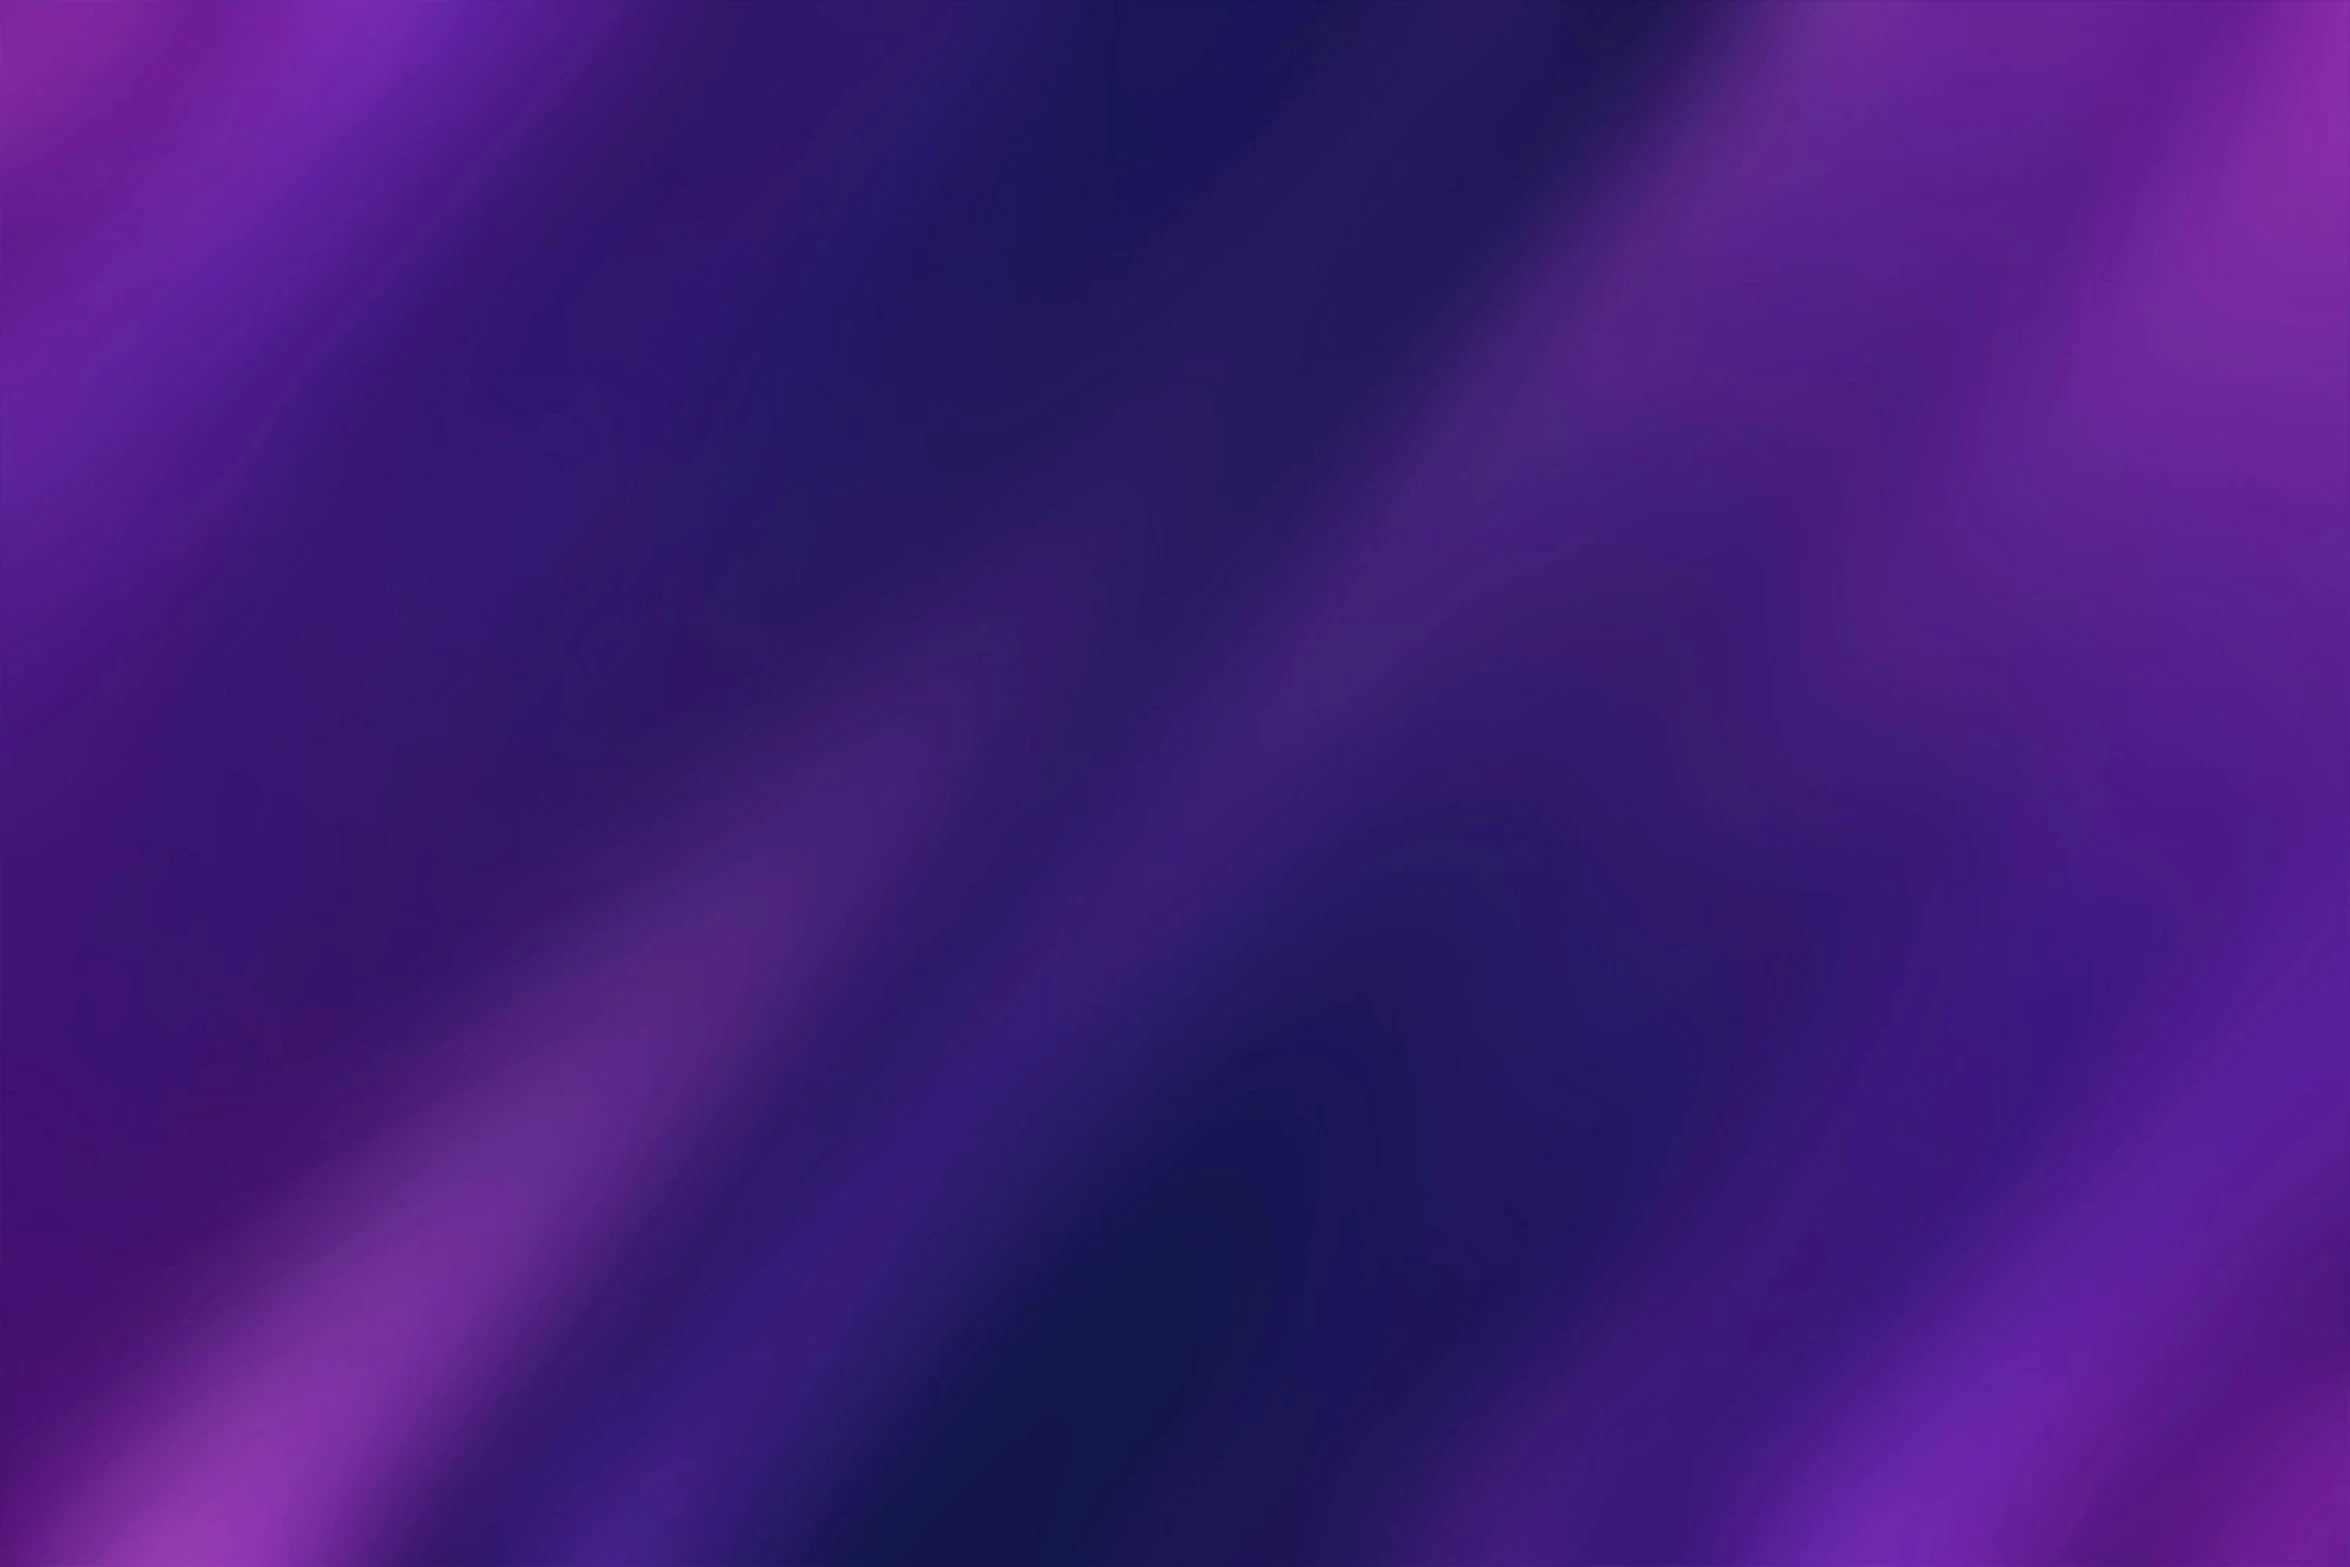 abstract purple background with a black bottom and purple bottom